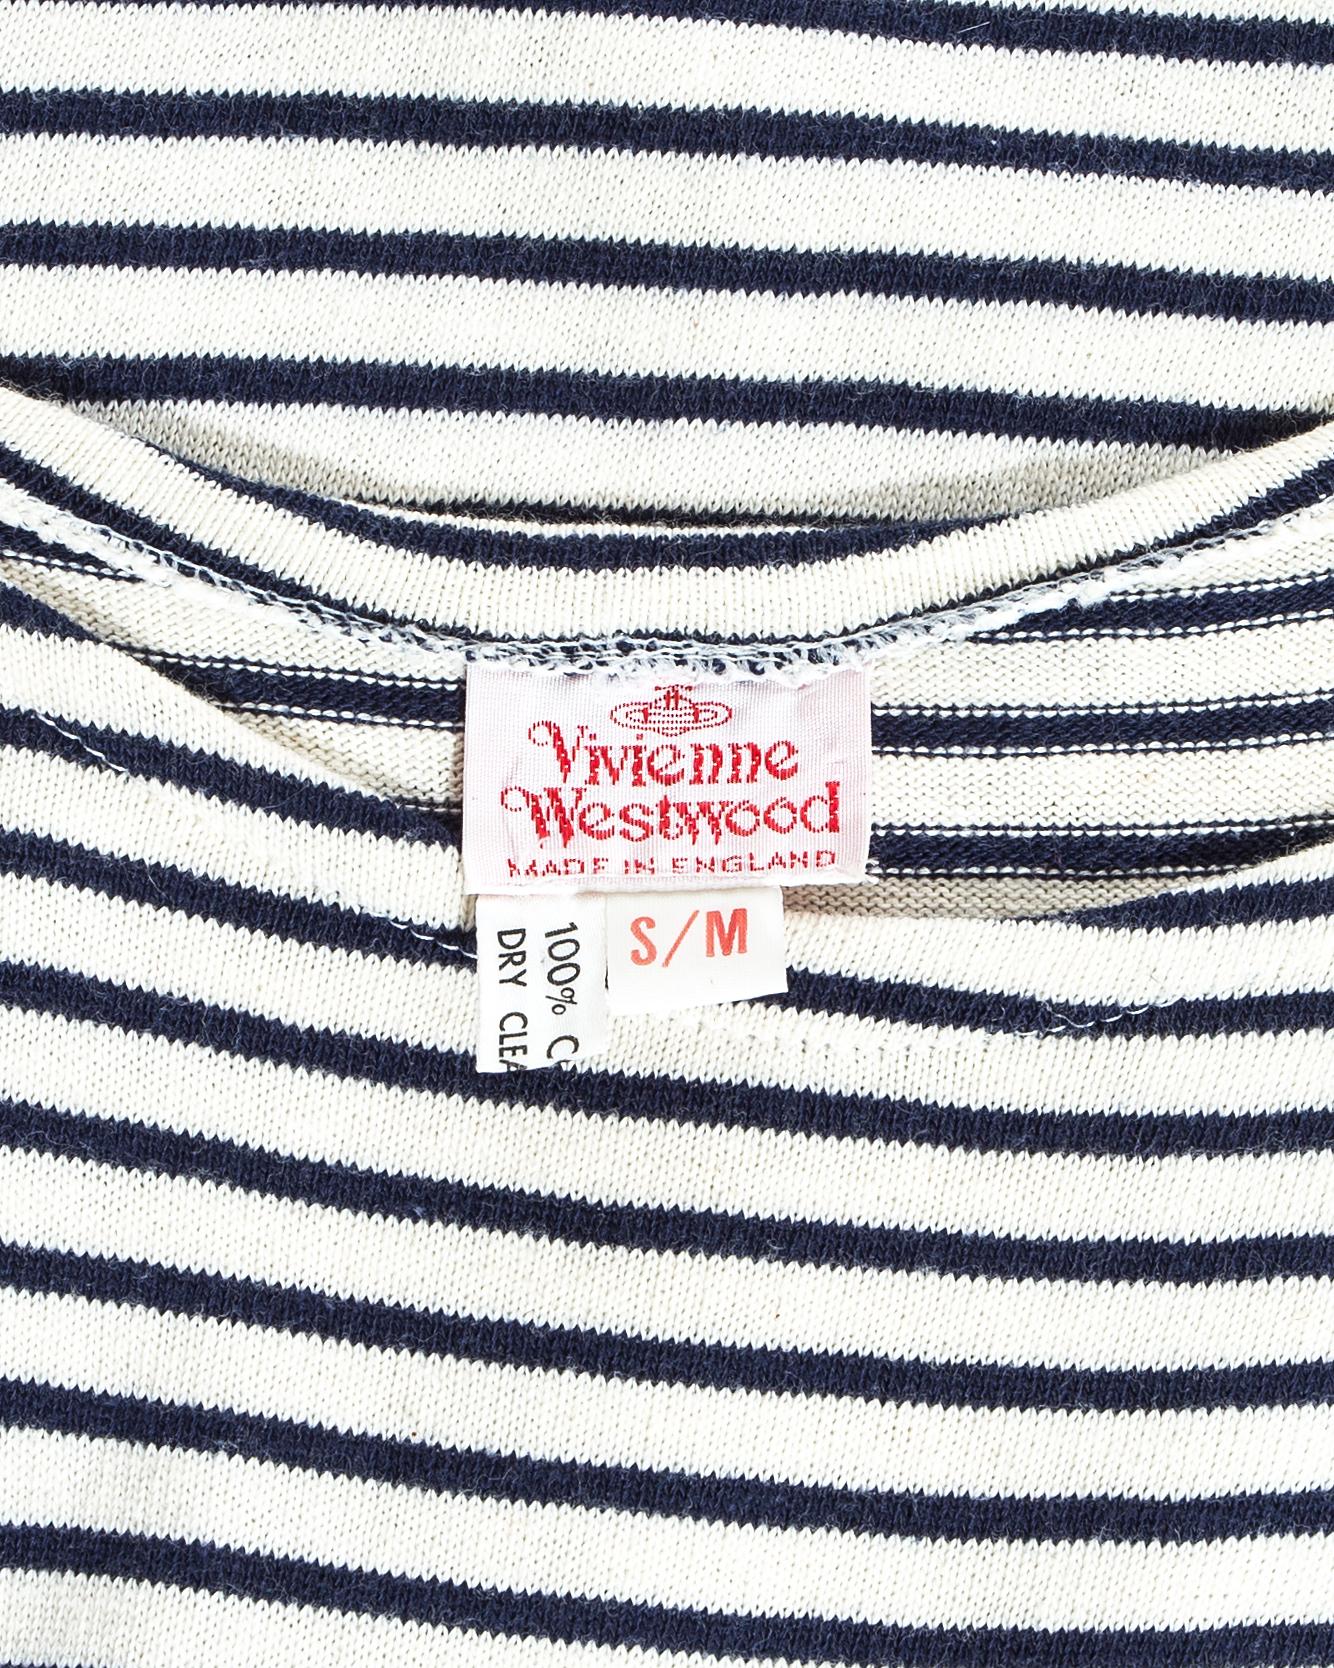 Vivienne Westwood navy blue striped cotton jersey dress, ss 1989 In Good Condition For Sale In London, GB